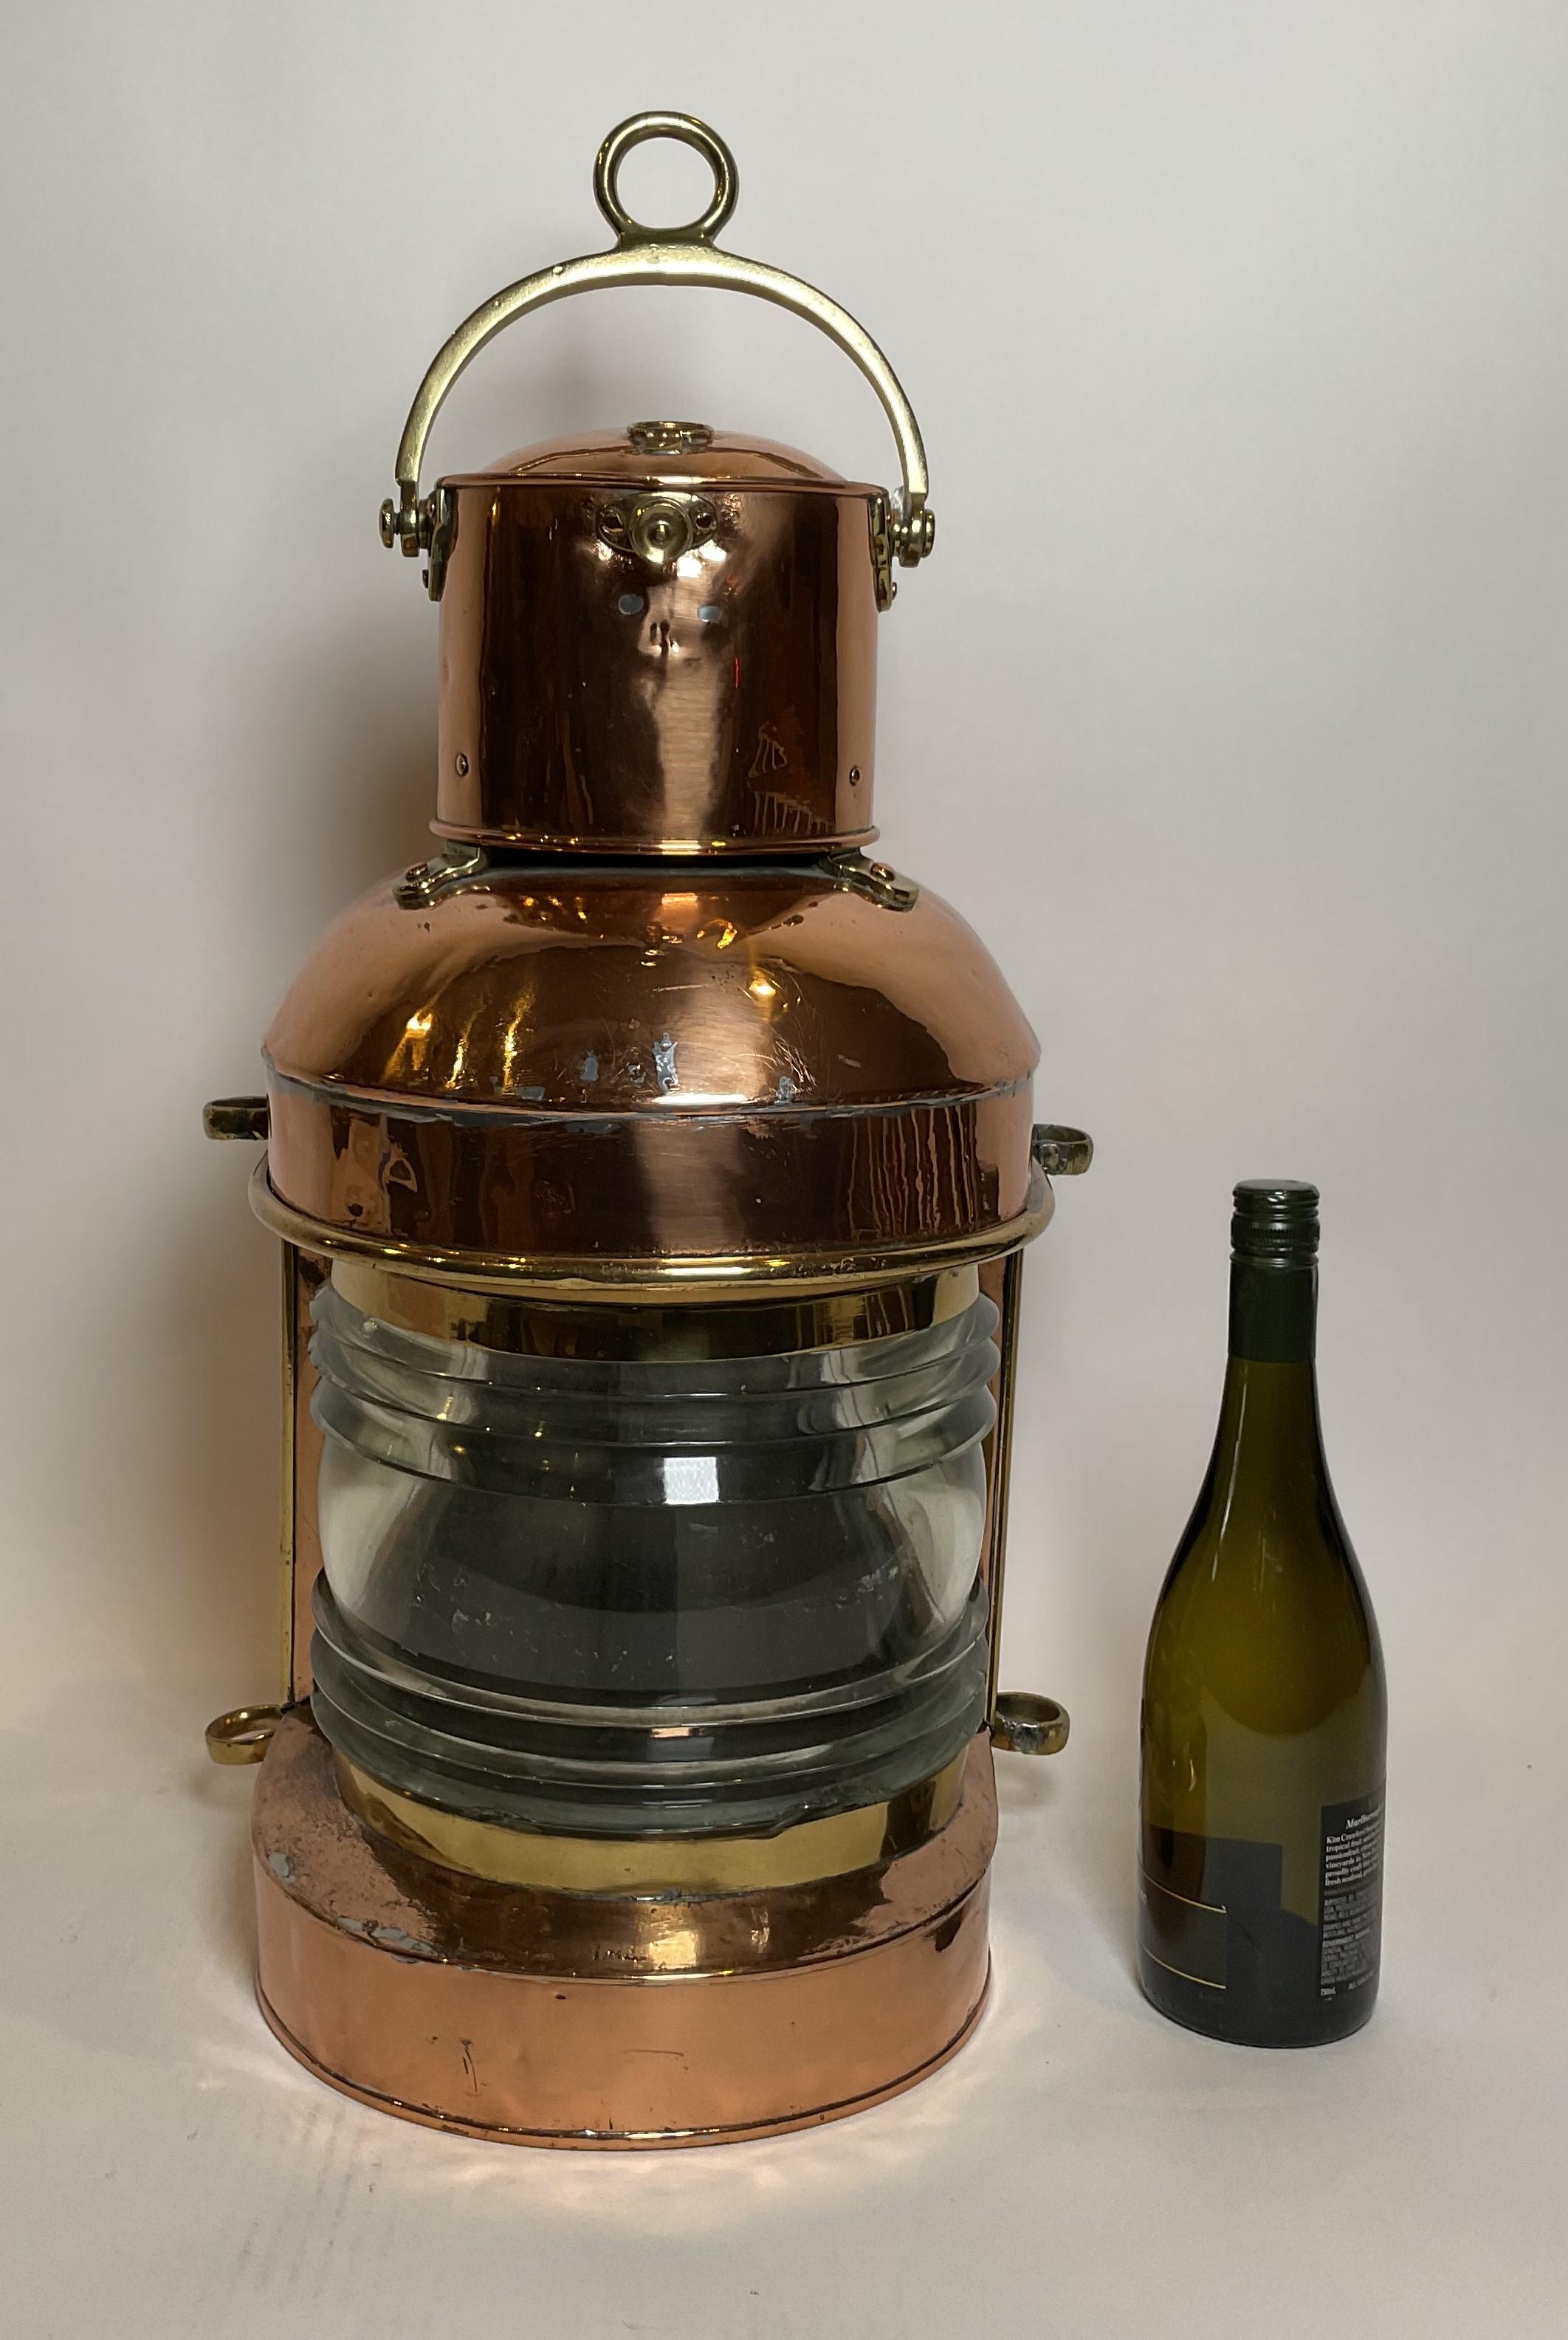 Beautiful polished copper ships masthead lantern with glass fresnel lens, original burner, hinged door, etc. Brass fittings include mounting rings, carry handles, chimney mounts, and lens trim. Awesome design. Circa 1920.

Weight: 17 lbs.
Overall